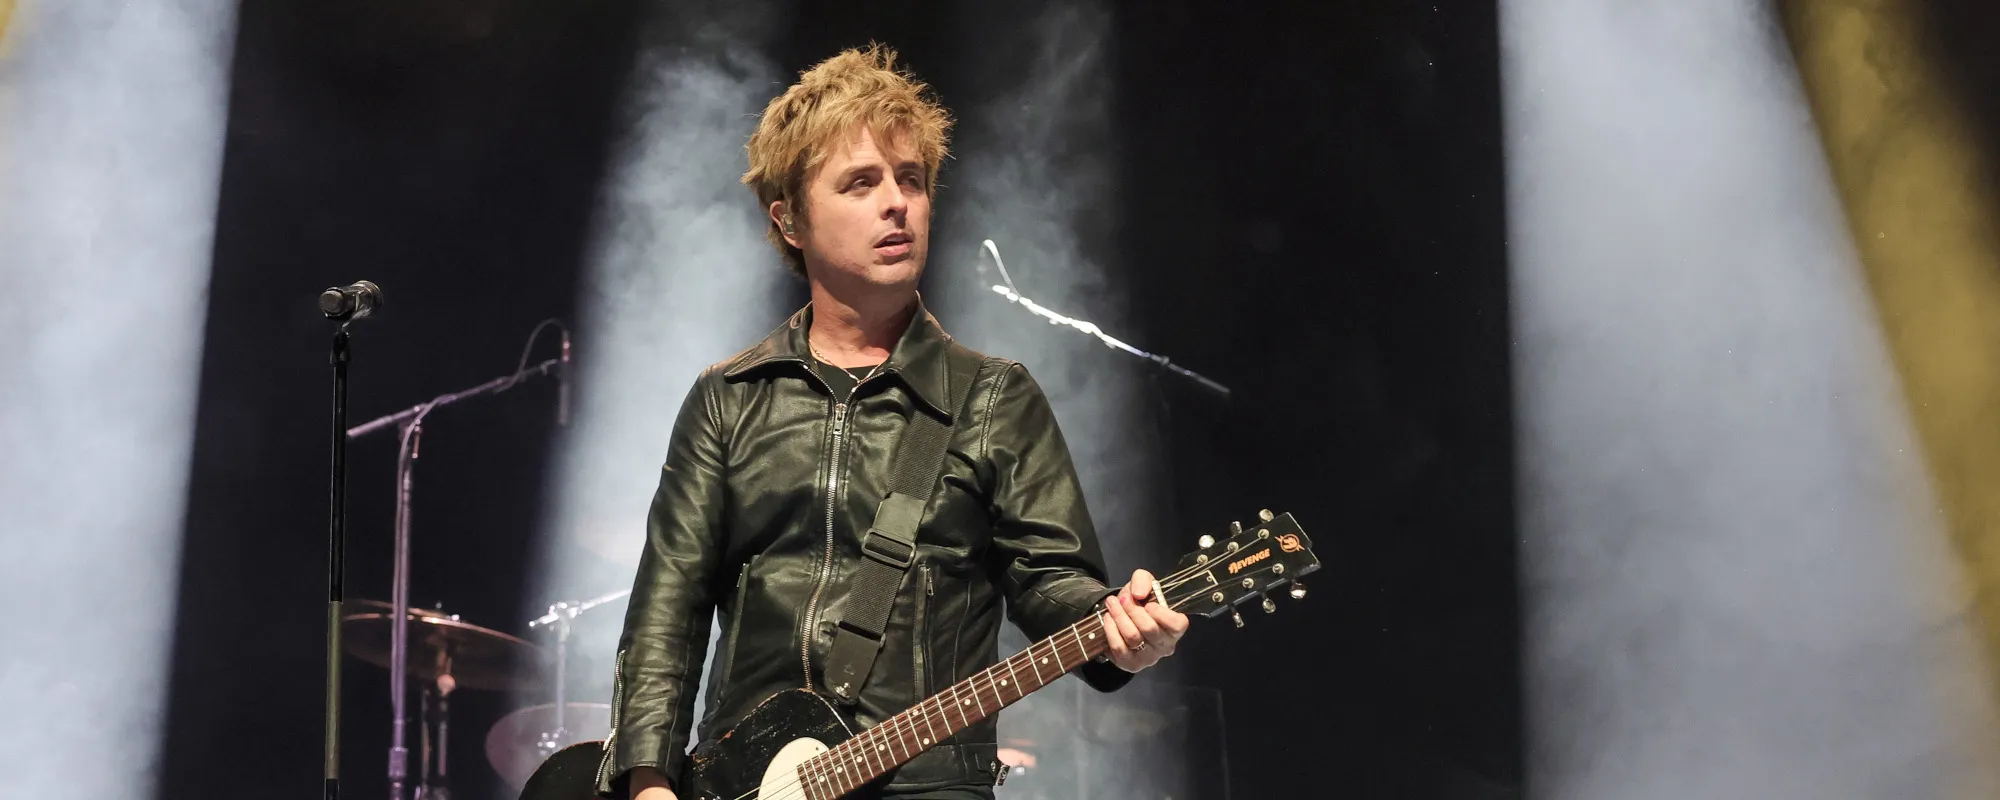 The Meaning Behind “Brain Stew” by Green Day and Why It Was Banned